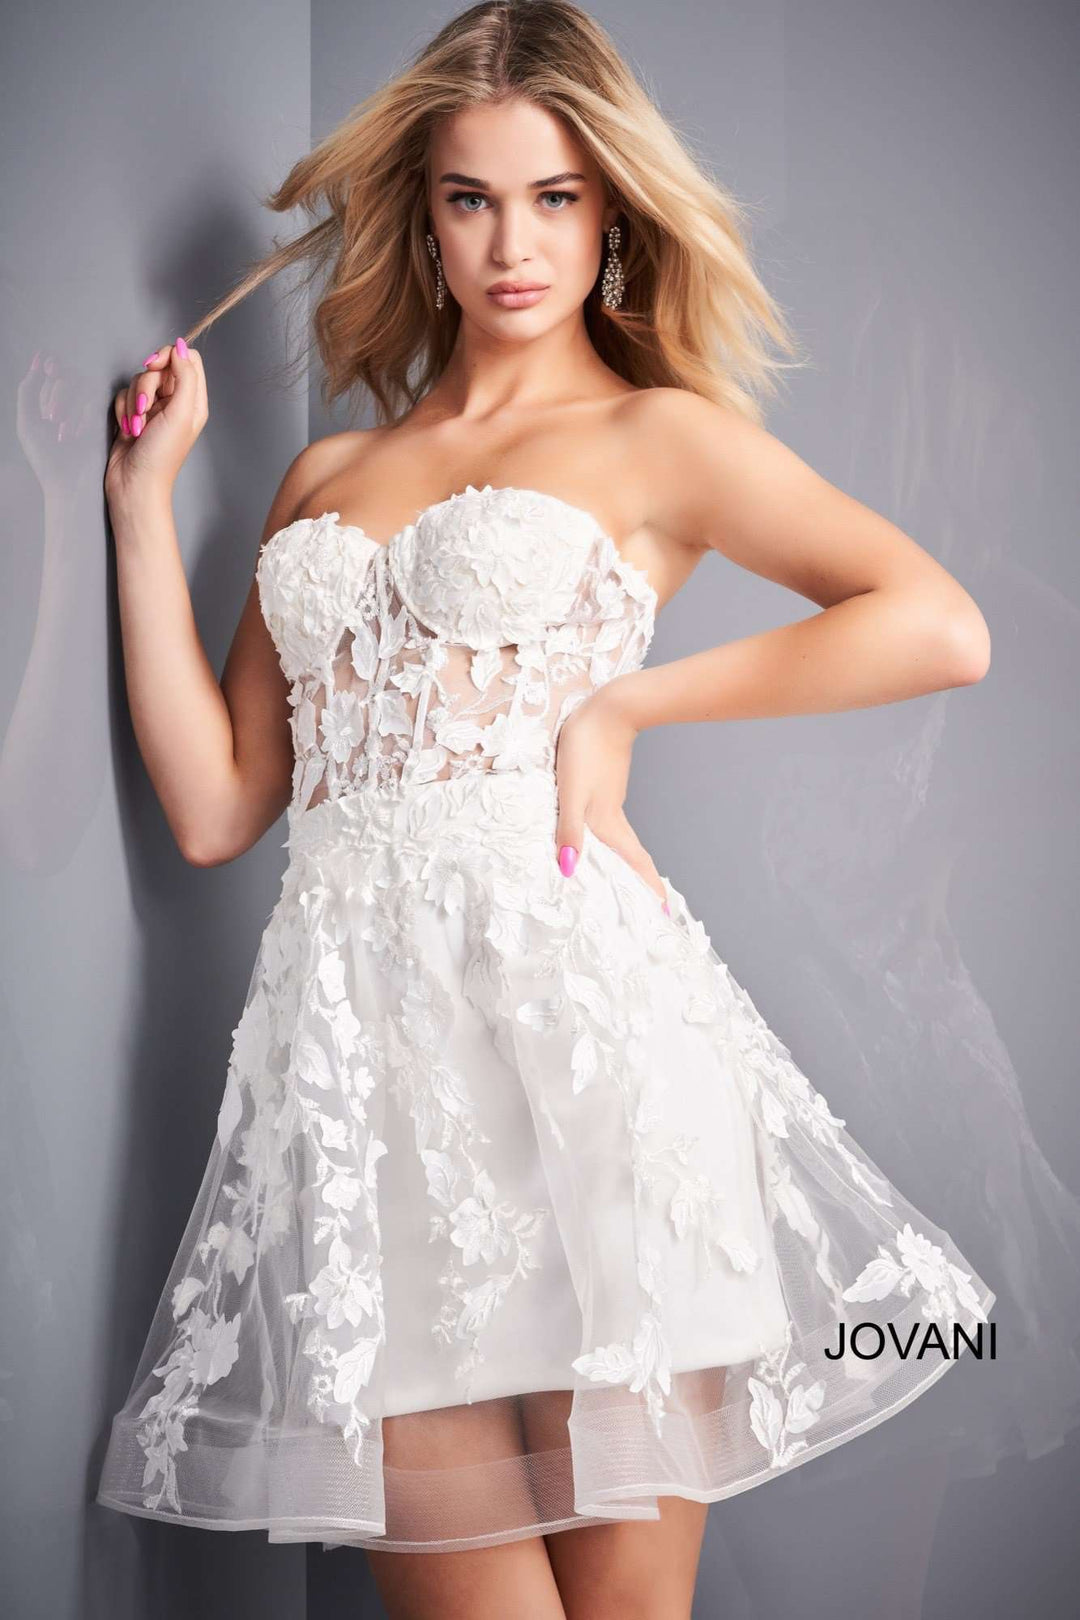 Fit and Flare Homecoming Dress Jovani 04109 - Morvarieds Fashion